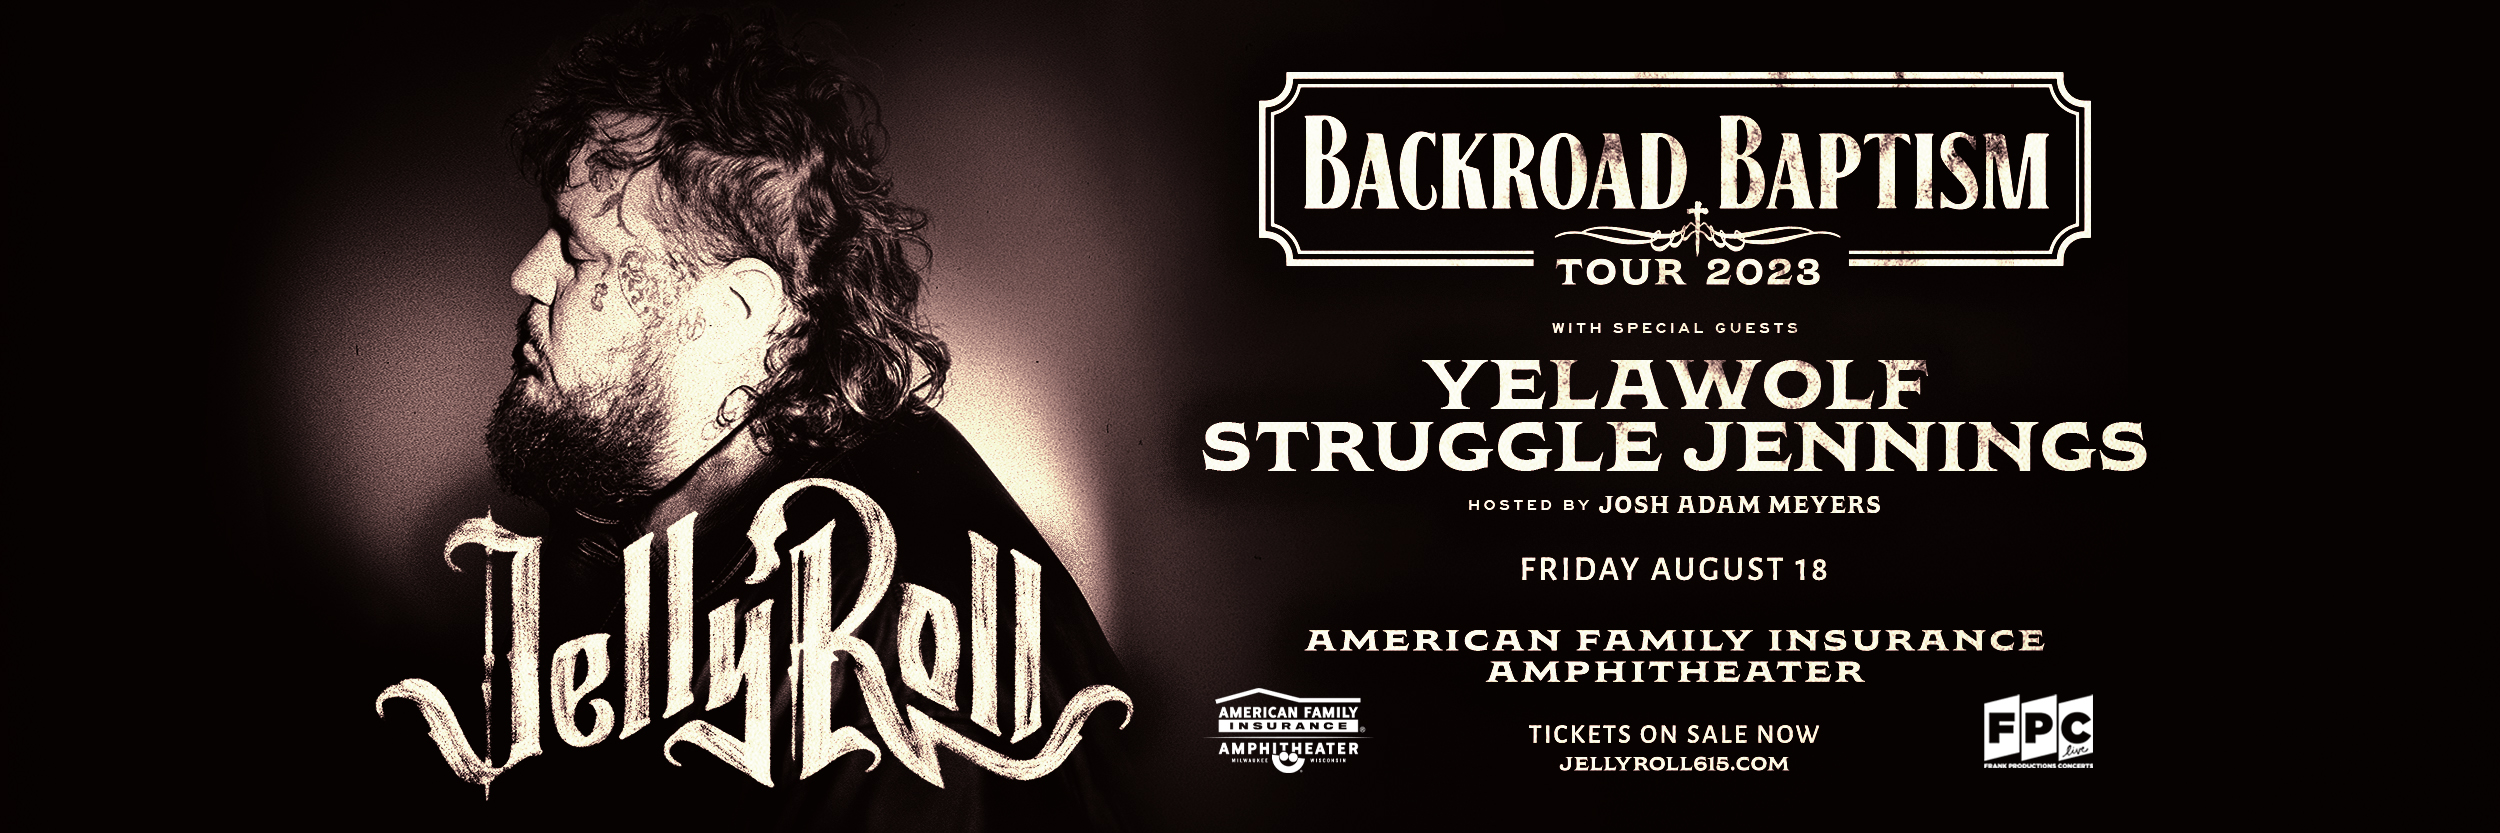 Jelly Roll - Backroad Baptism Tour, August 18